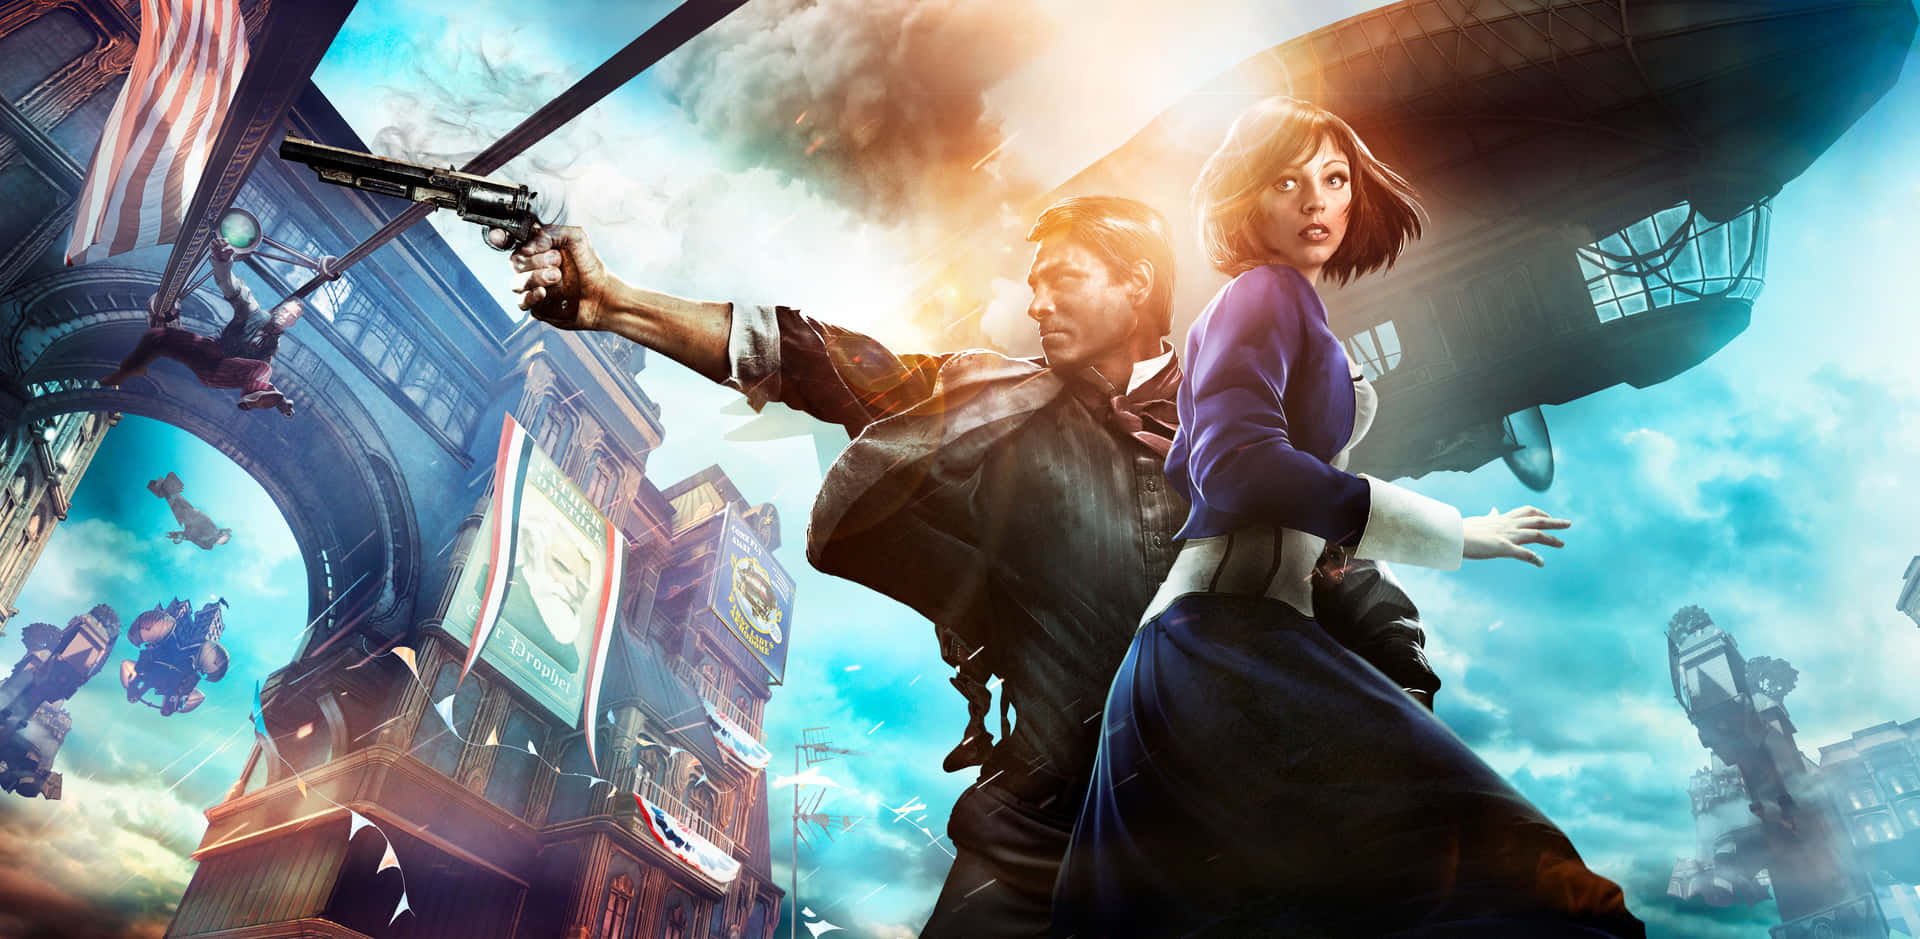 A Man And Woman Holding Guns In Front Of A City Wallpaper